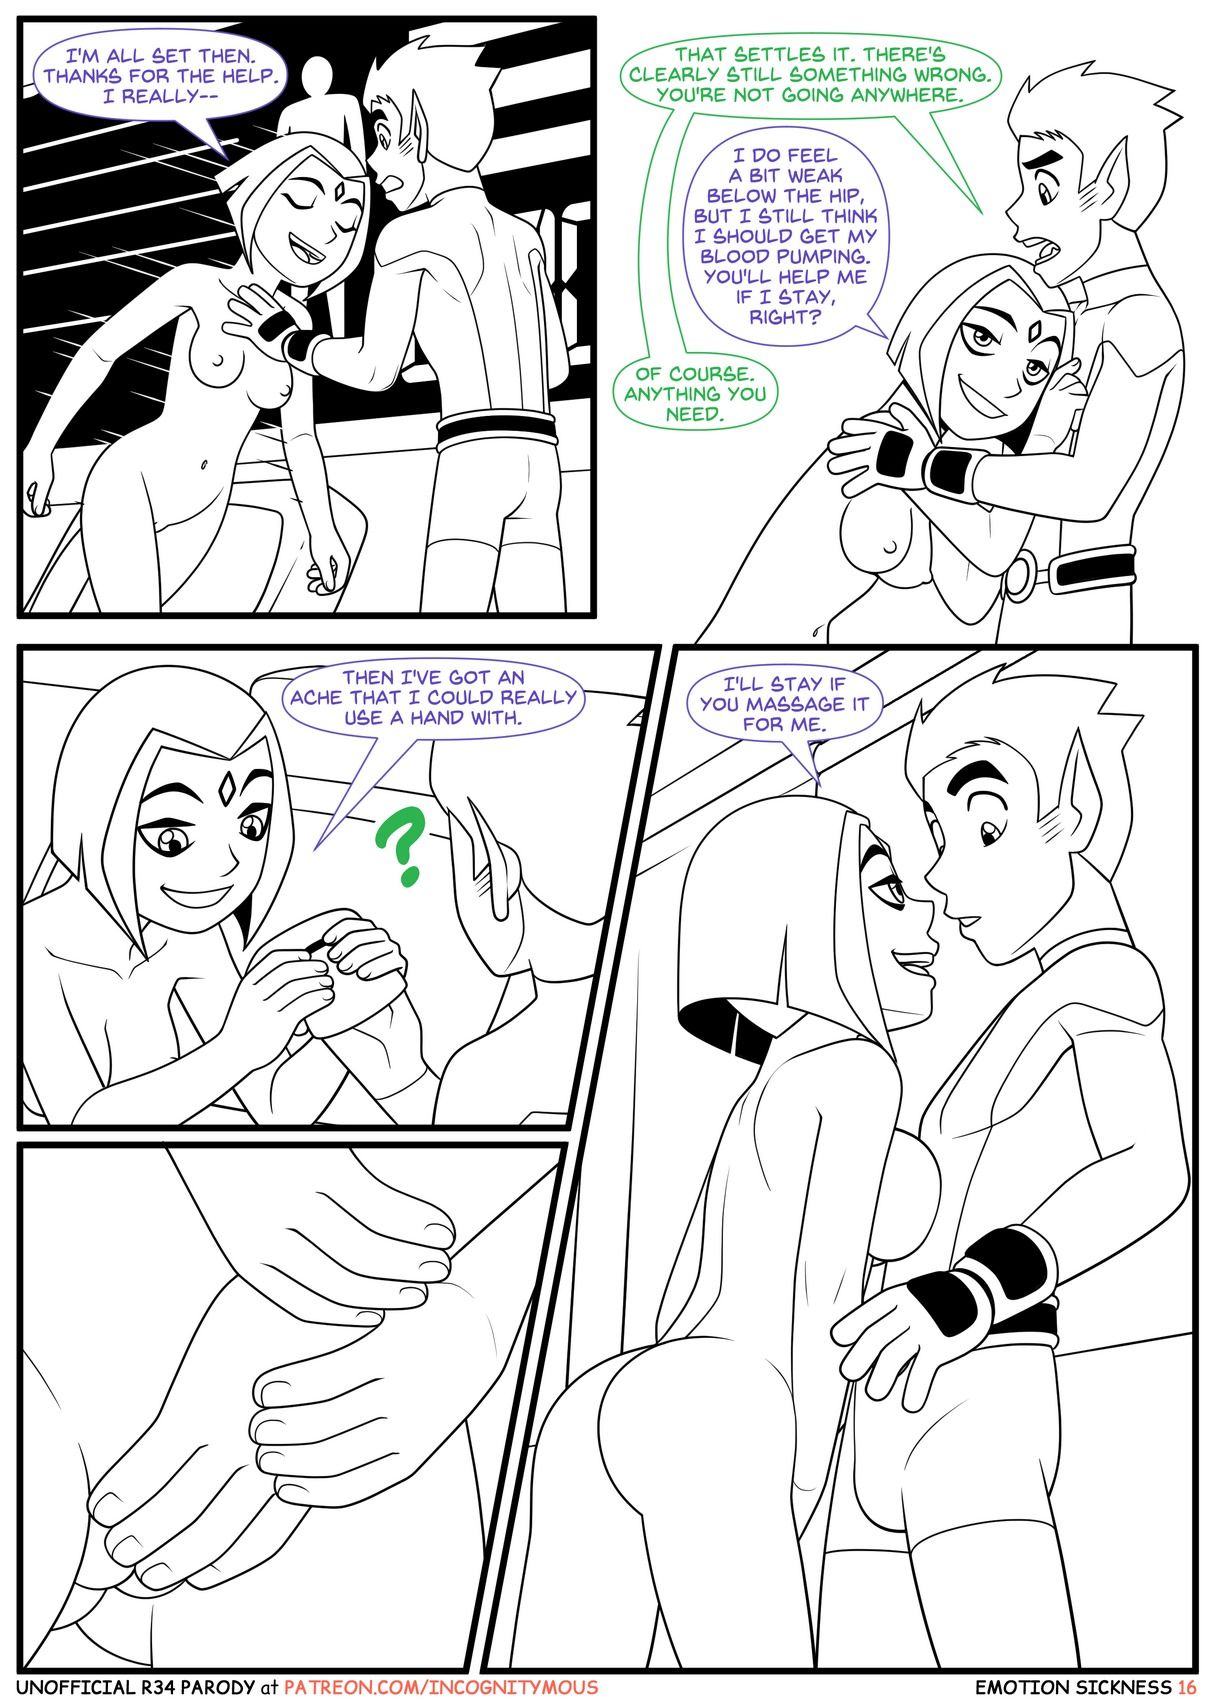 Teen Titans - Emotion Sickness (Incognitymous) page 32